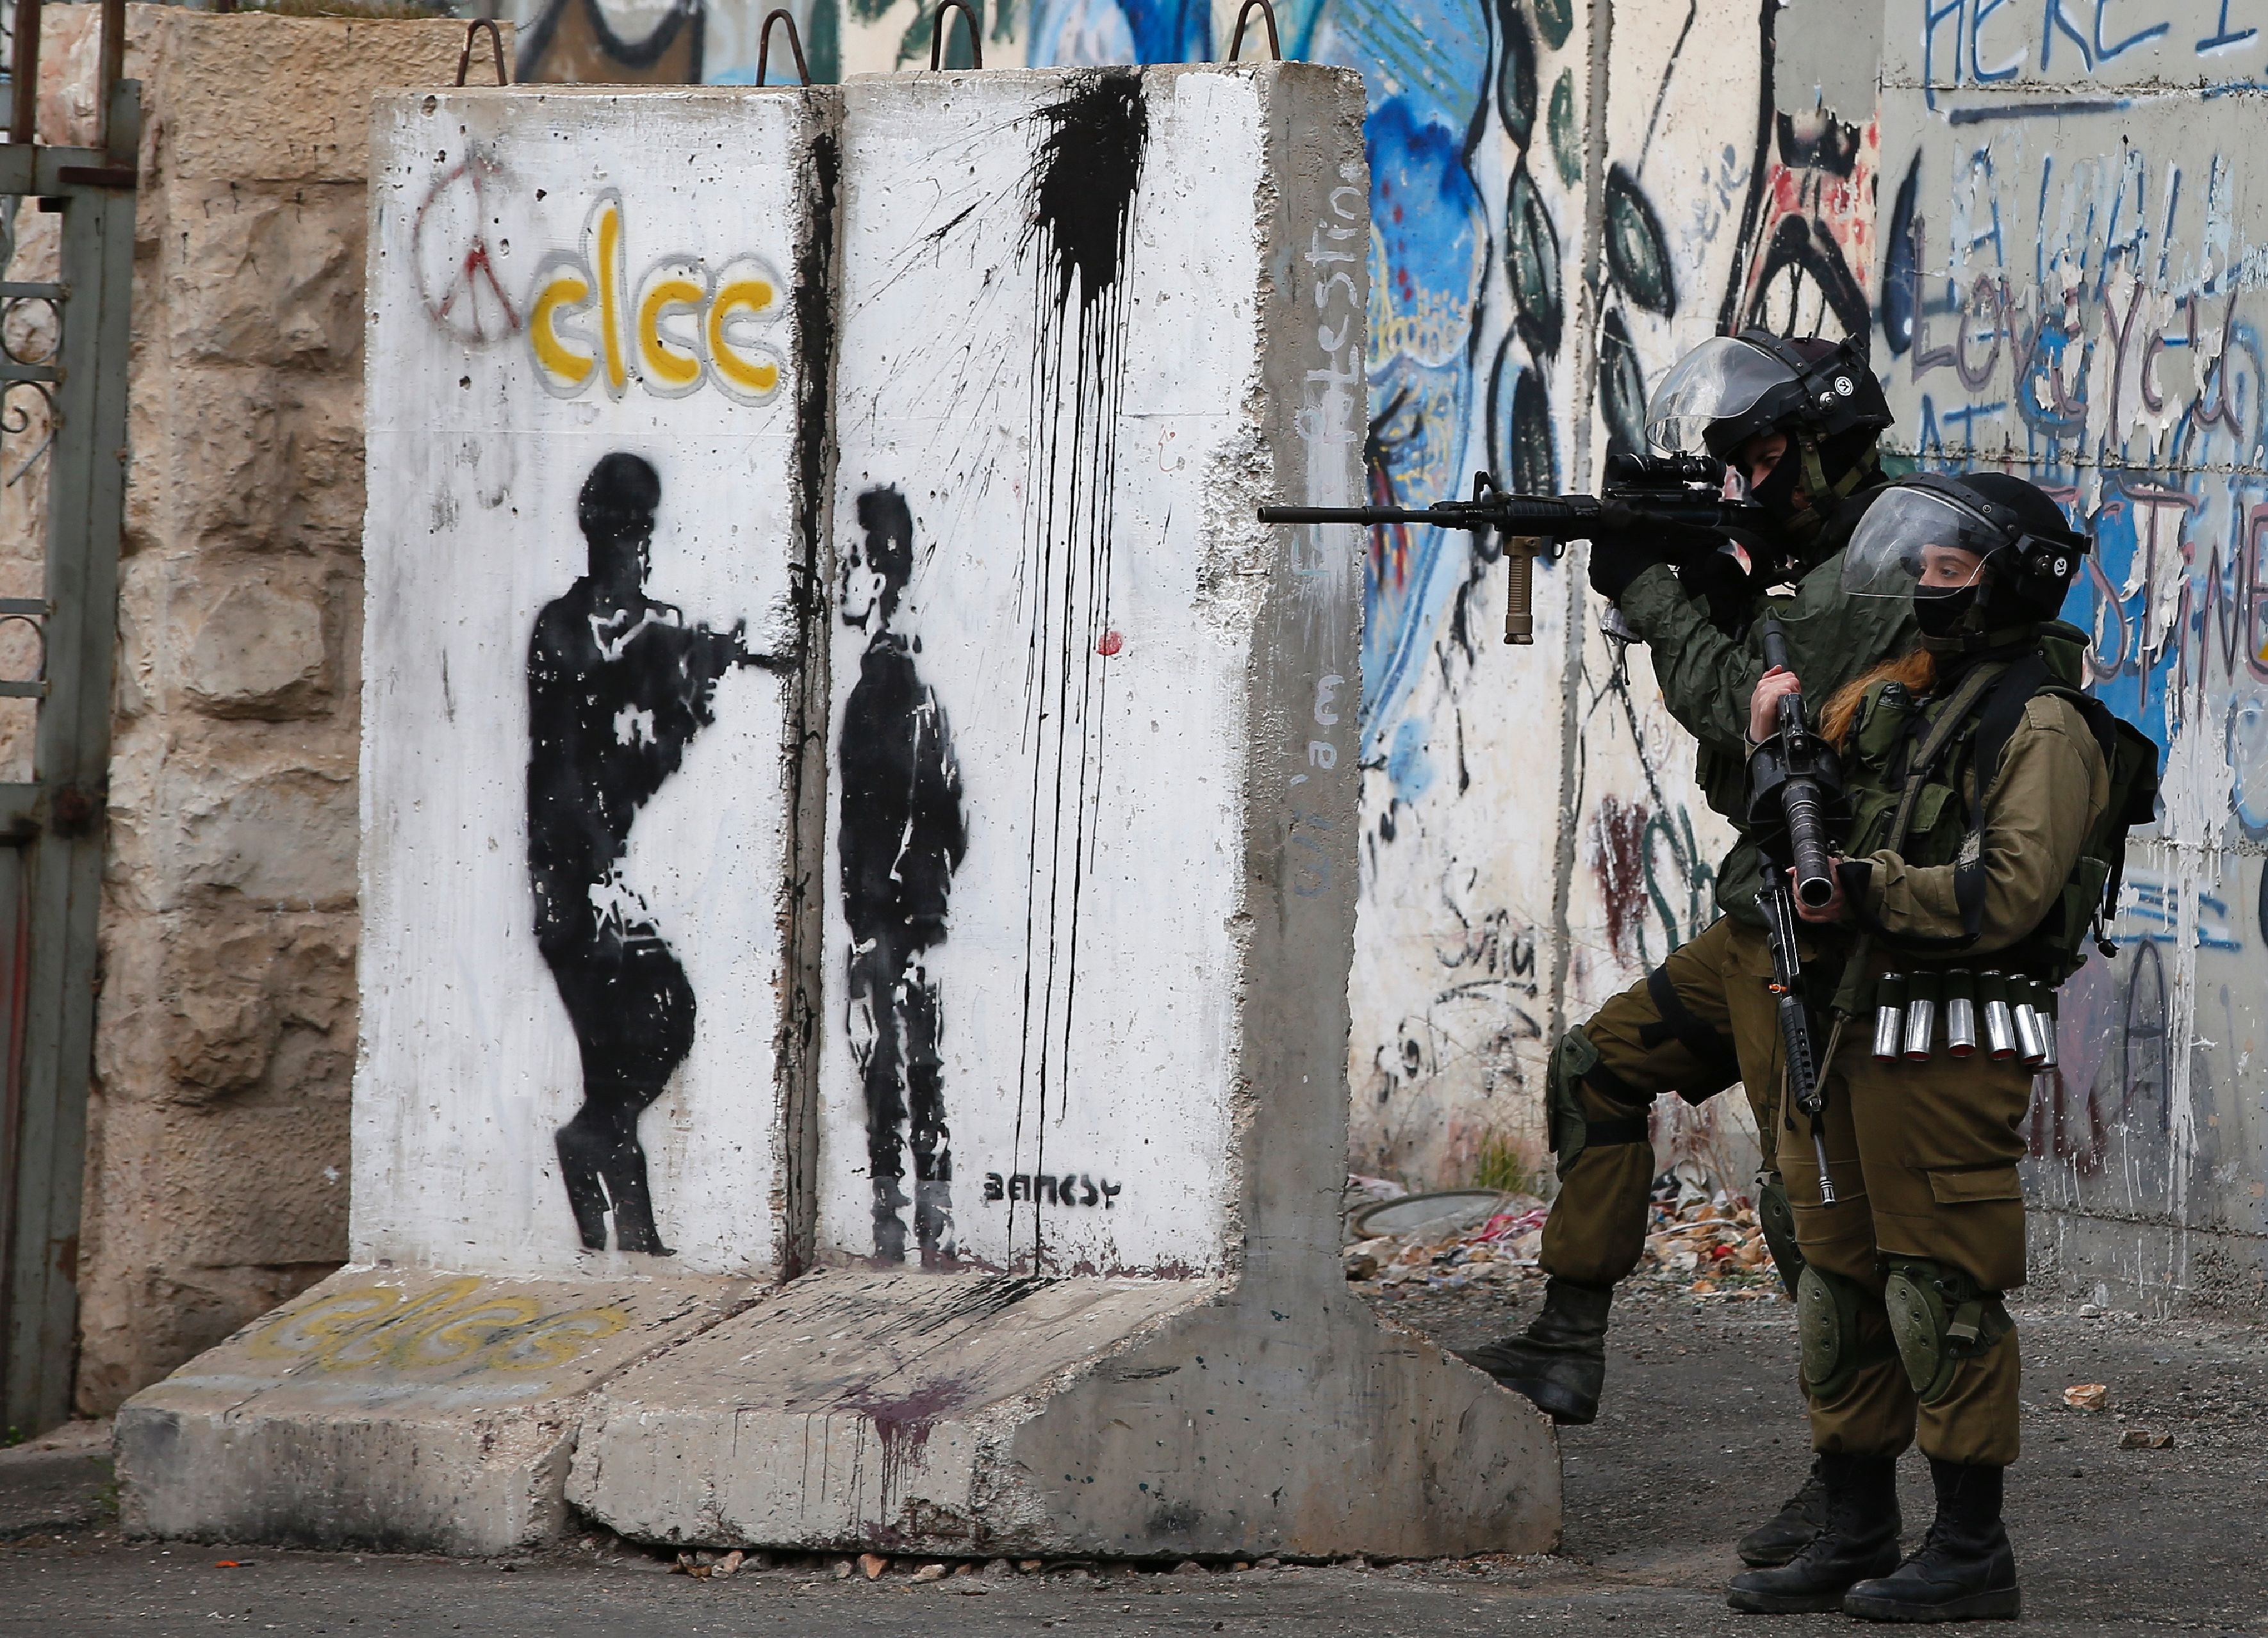 Israel’s problem with police brutality is going nowhere&nbsp;